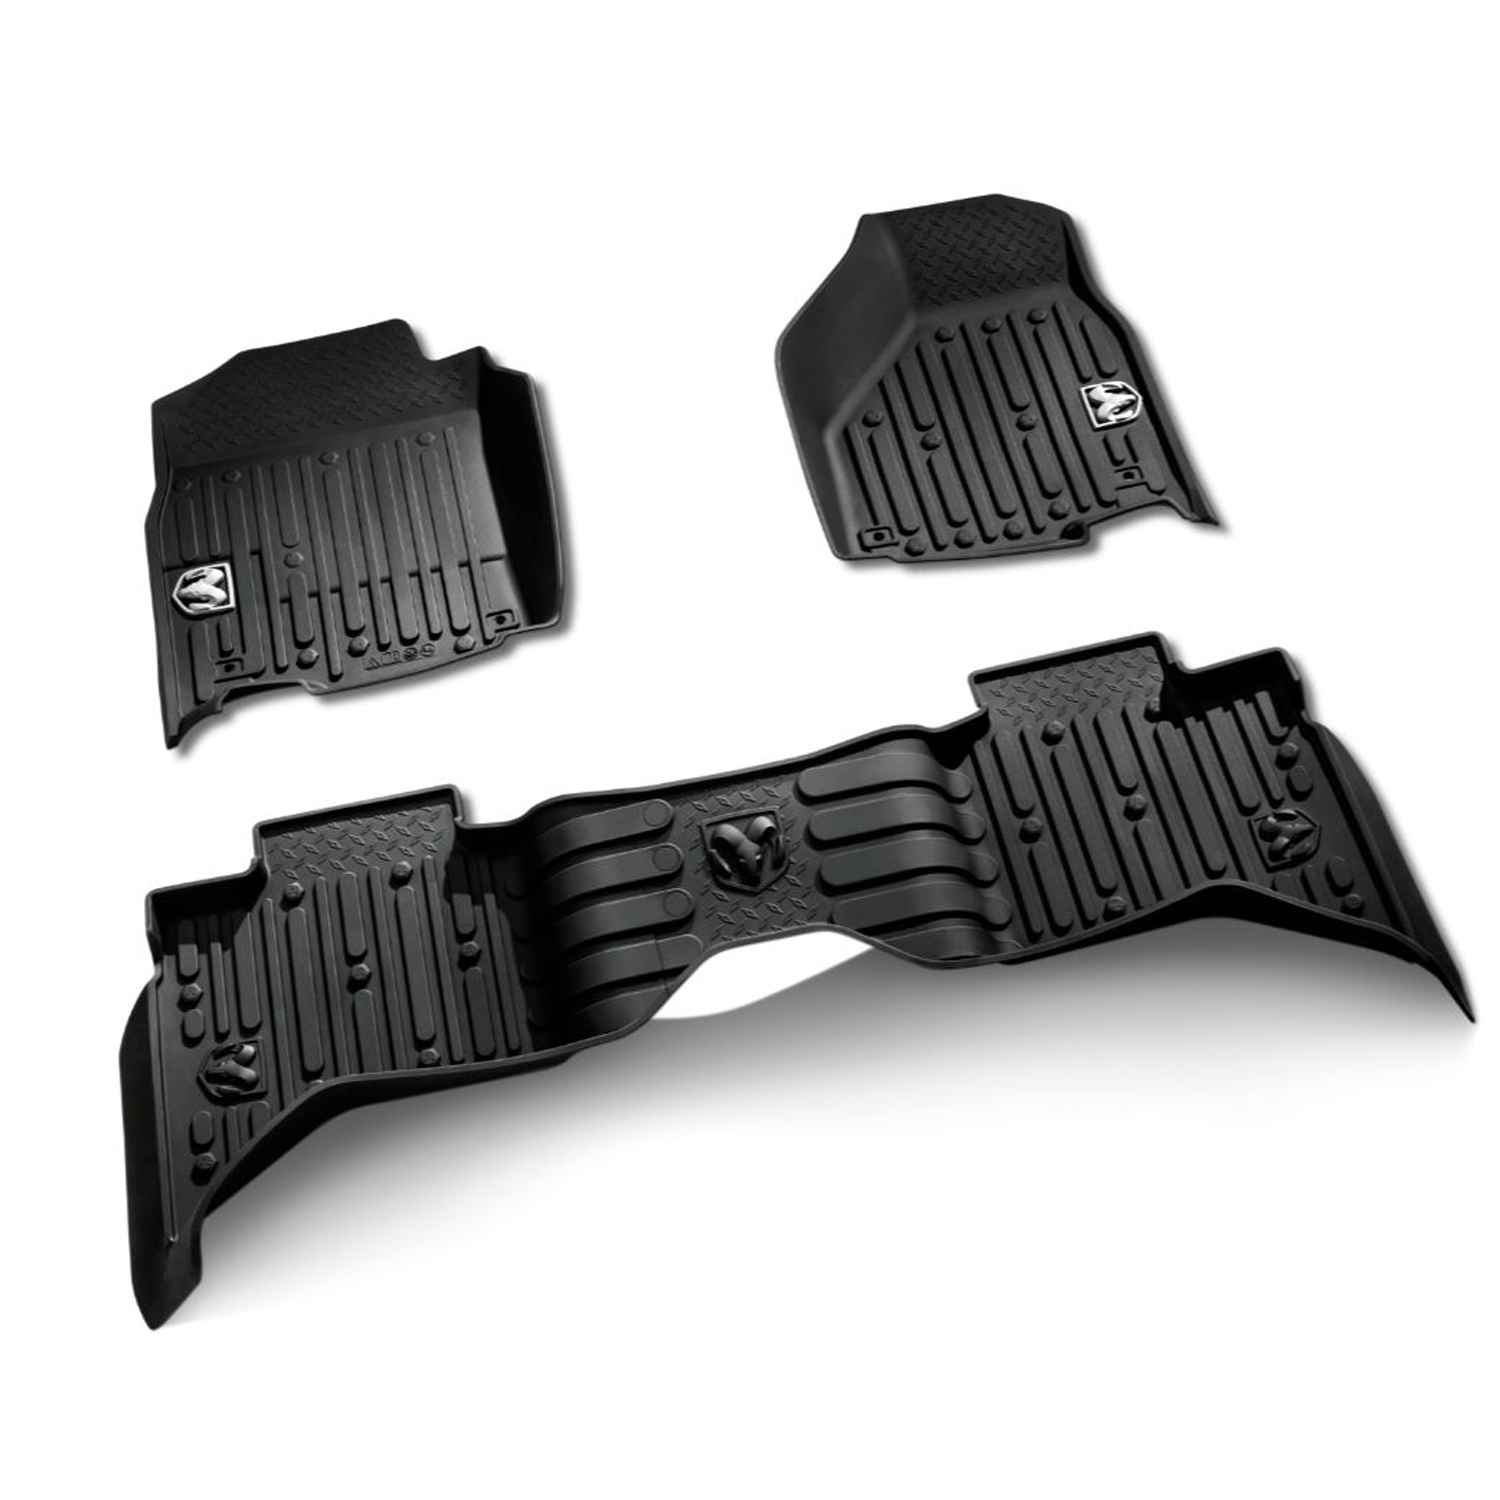 OEM 2016 Ram 5500 Chassis Cab All-weather Floor Mats, bucket-style, Regular Cab, Black (Part #82215579AB)